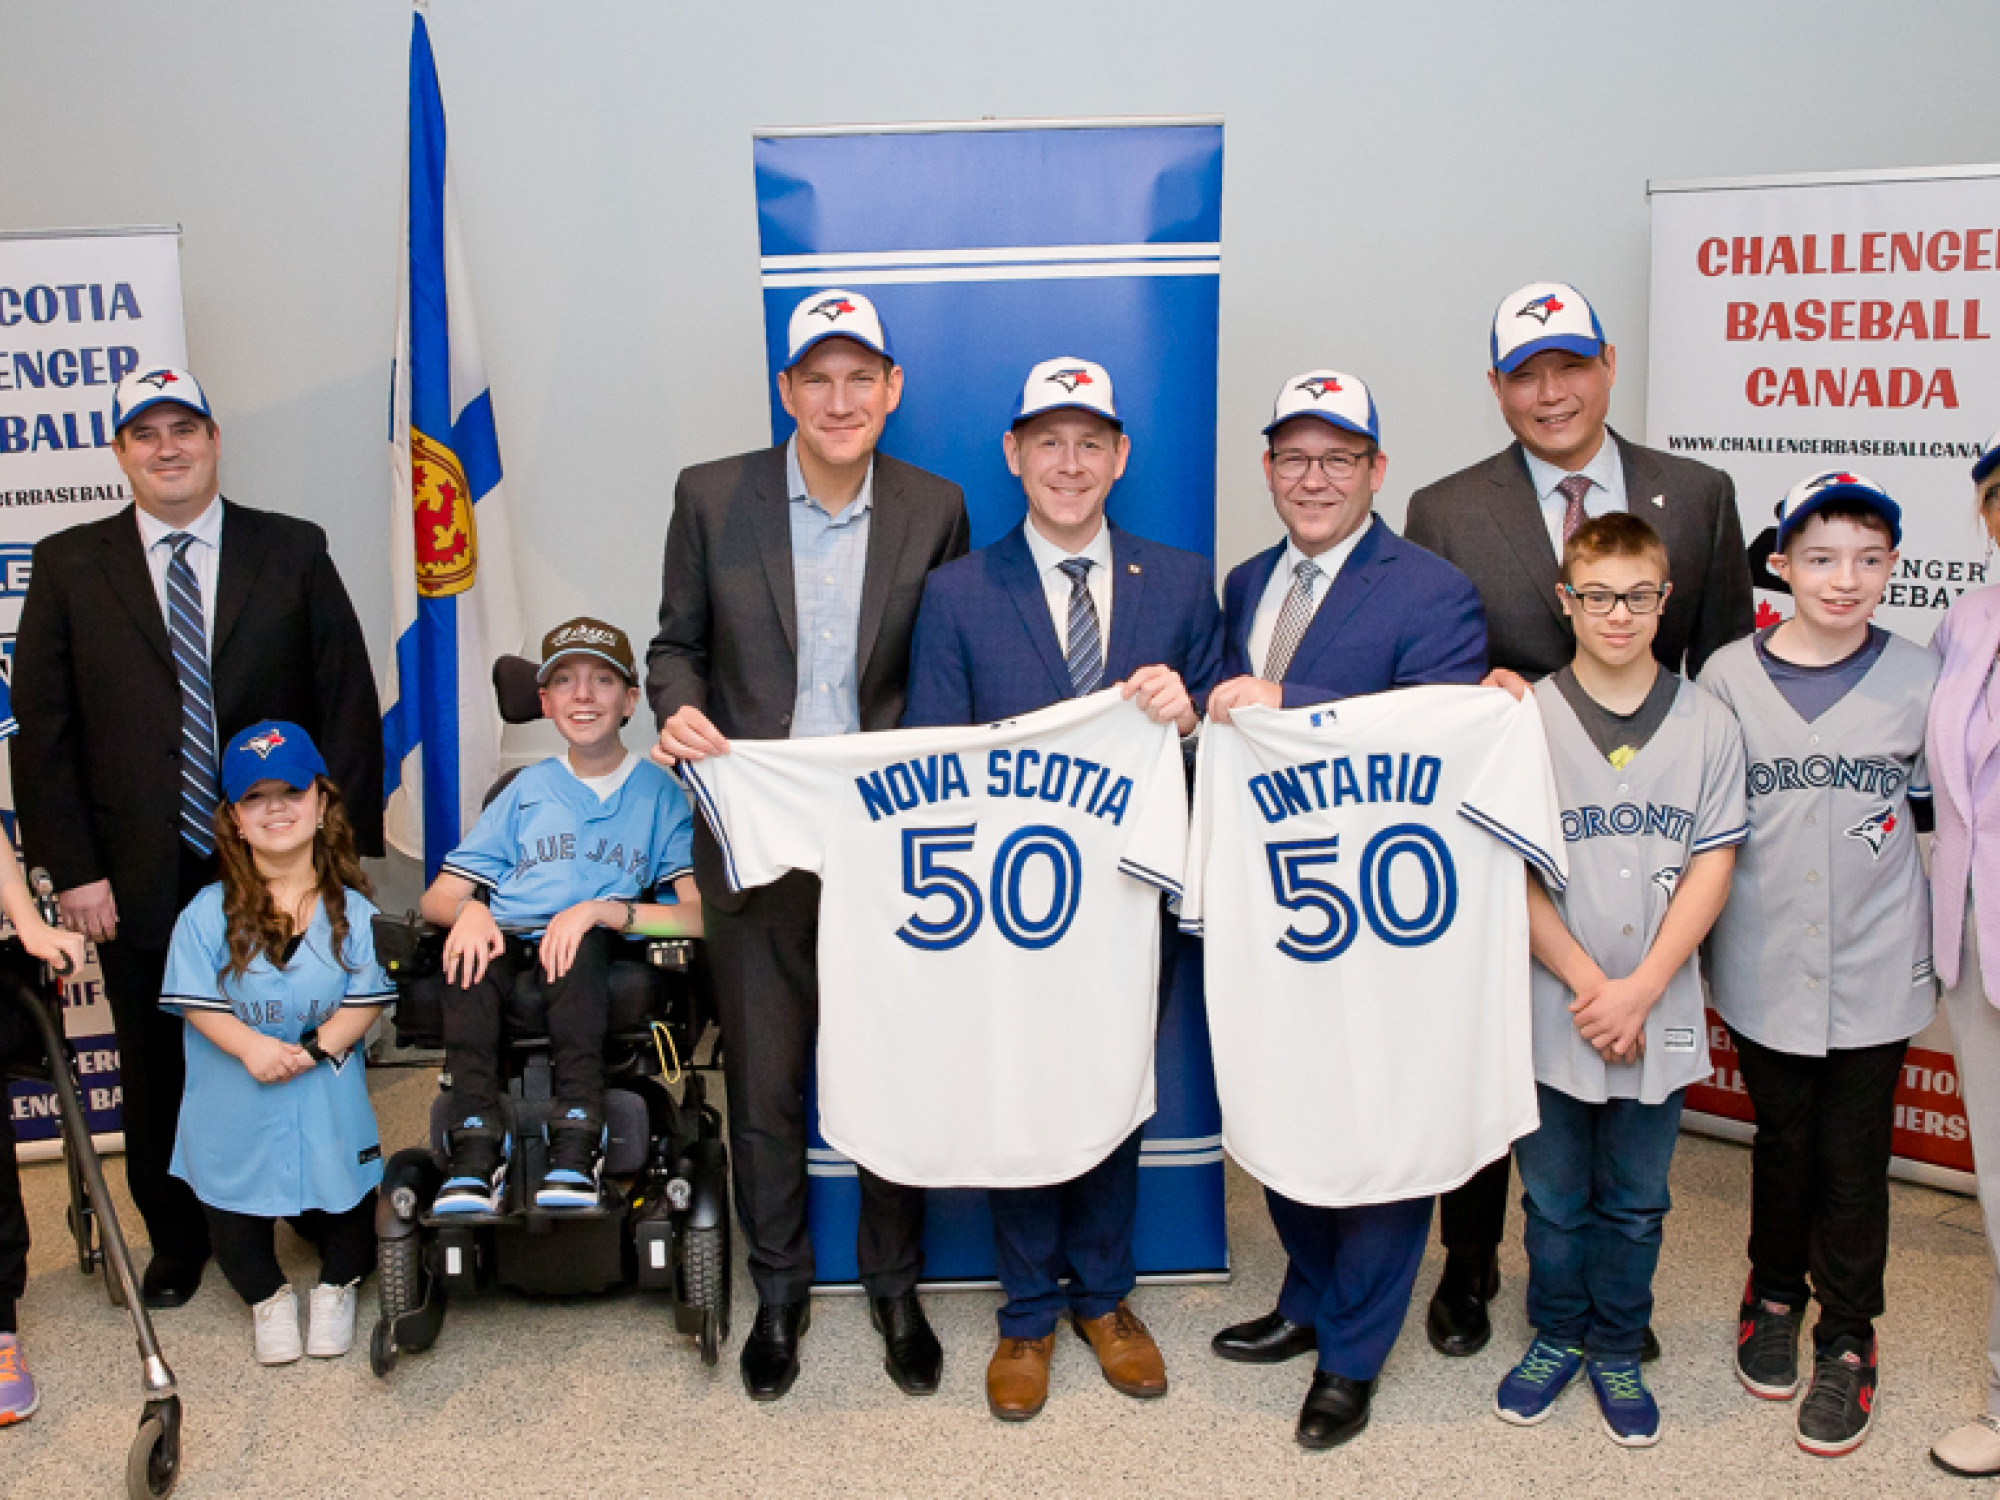 Young athletes from the Jays Cares Challenger Baseball program with (L-R): Randy Crouse, Challenger Baseball National Coordinator; James Dodds, Chair, Jays Cares Foundation; Colton LeBlanc, Minister of Service Nova Scotia; Doug Downey, Ontario Attorney General; Stan Cho, Ontario Minister of Long-Term Care; and Barbara Adams, Minister of Seniors and Long Term Care for Nova Scotia